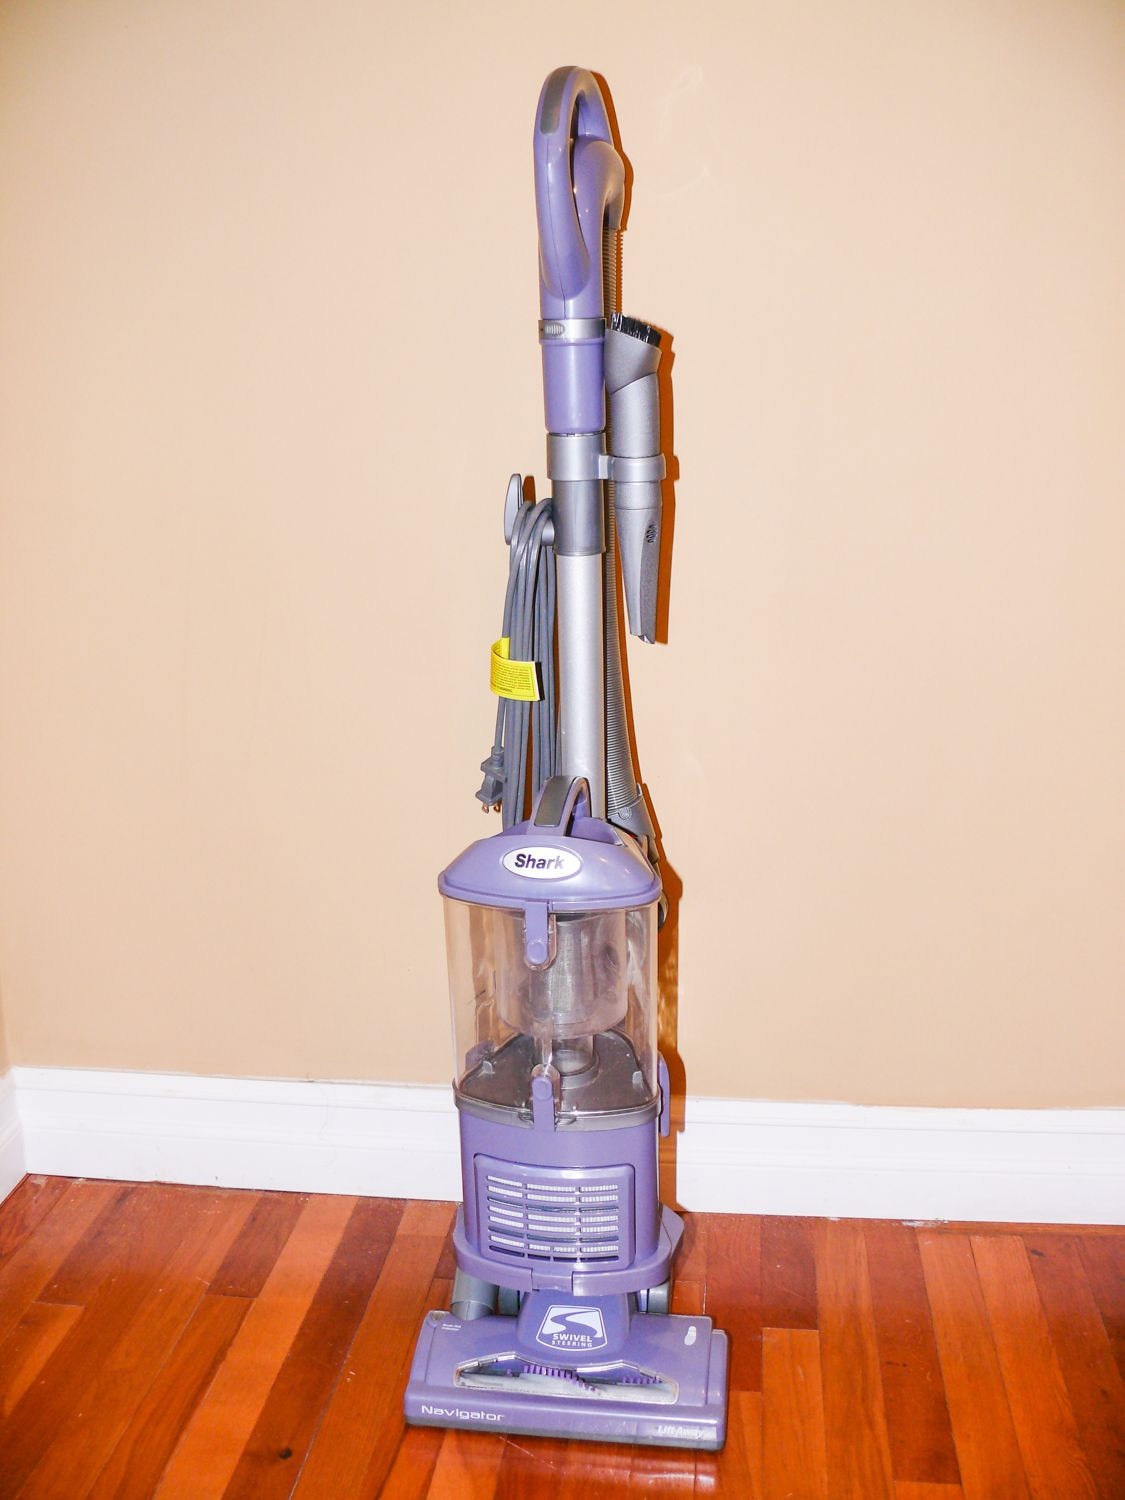 consumer reports vacuums for hardwood floors of the 10 best vacuum cleaners to buy in 2018 regarding 4062974 2 4 5bbf71b6c9e77c00511018e2